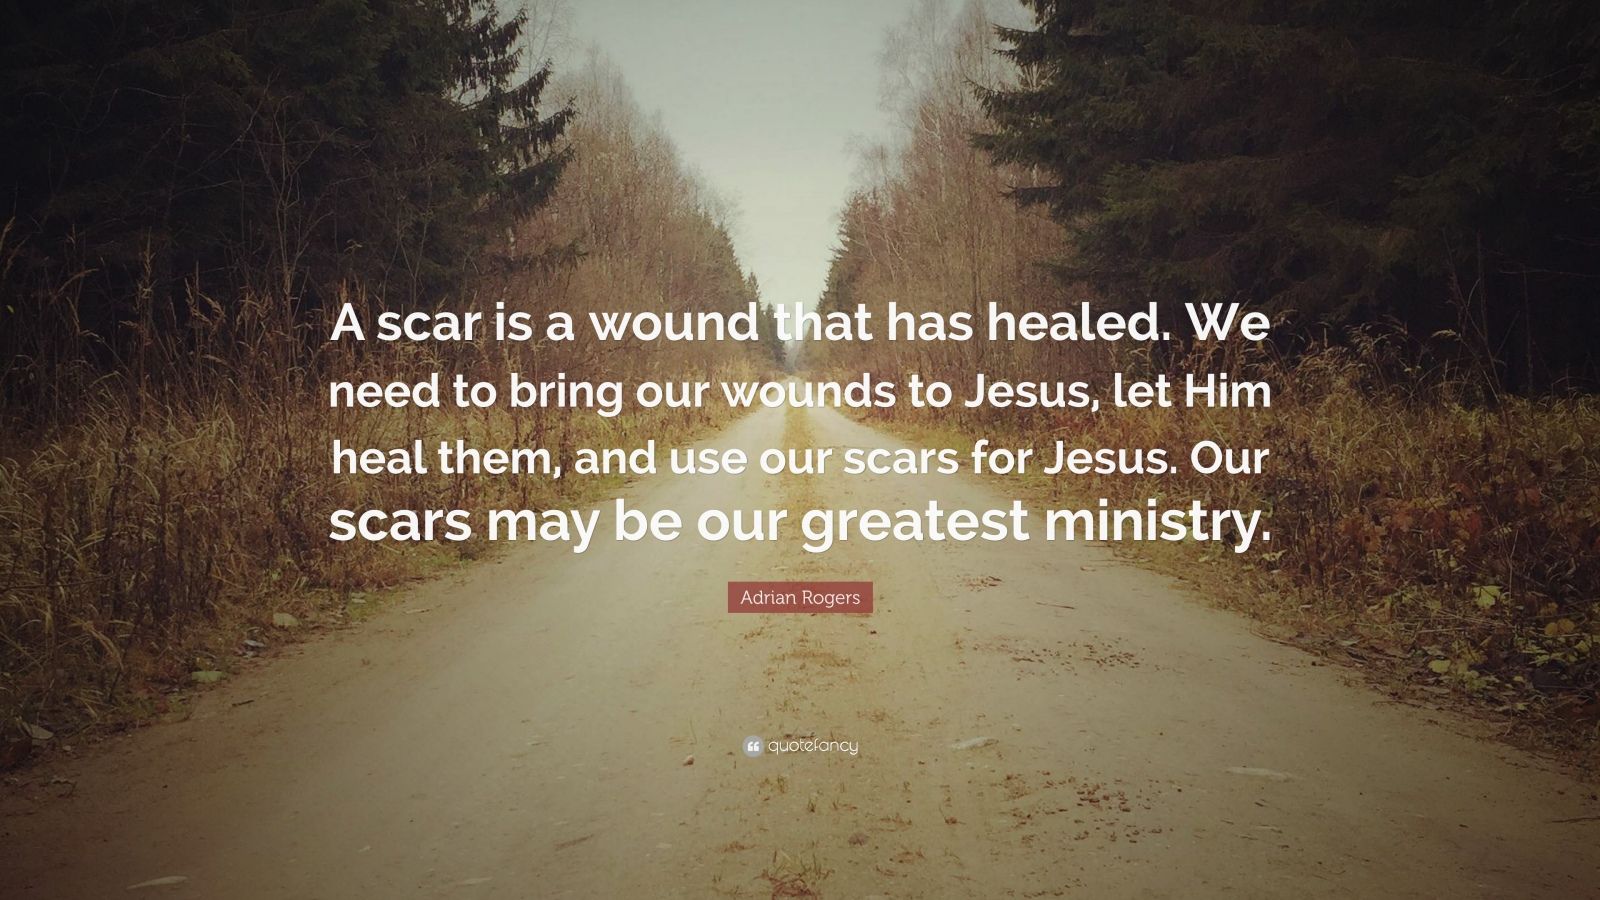 Adrian Rogers Quote: “A scar is a wound that has healed. We need to